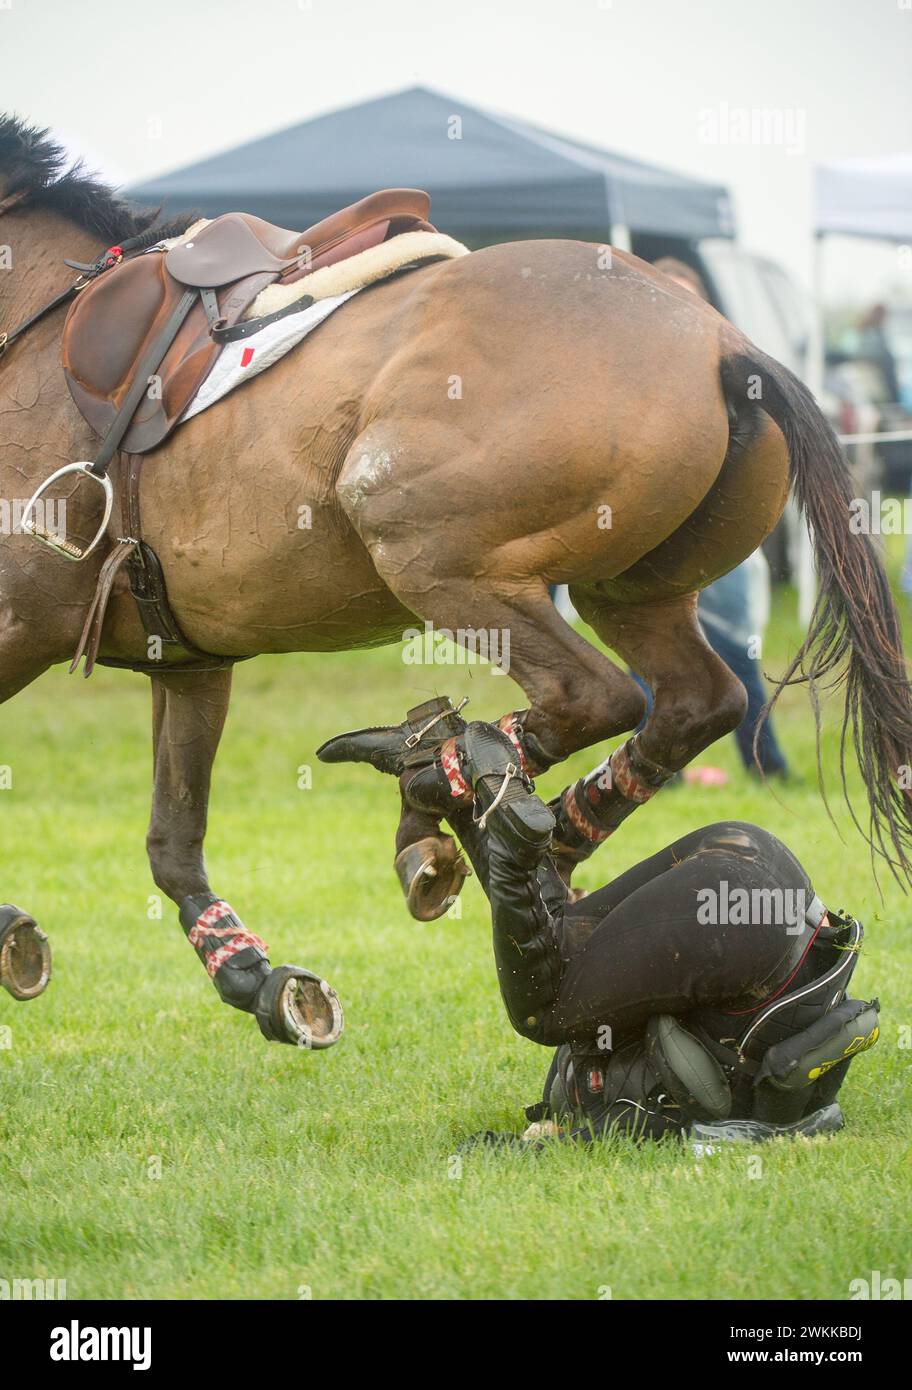 Fallen female horseback rider on ground wearing protective vest  expands when rider falls and releases valve protecting riders body in competition Stock Photo